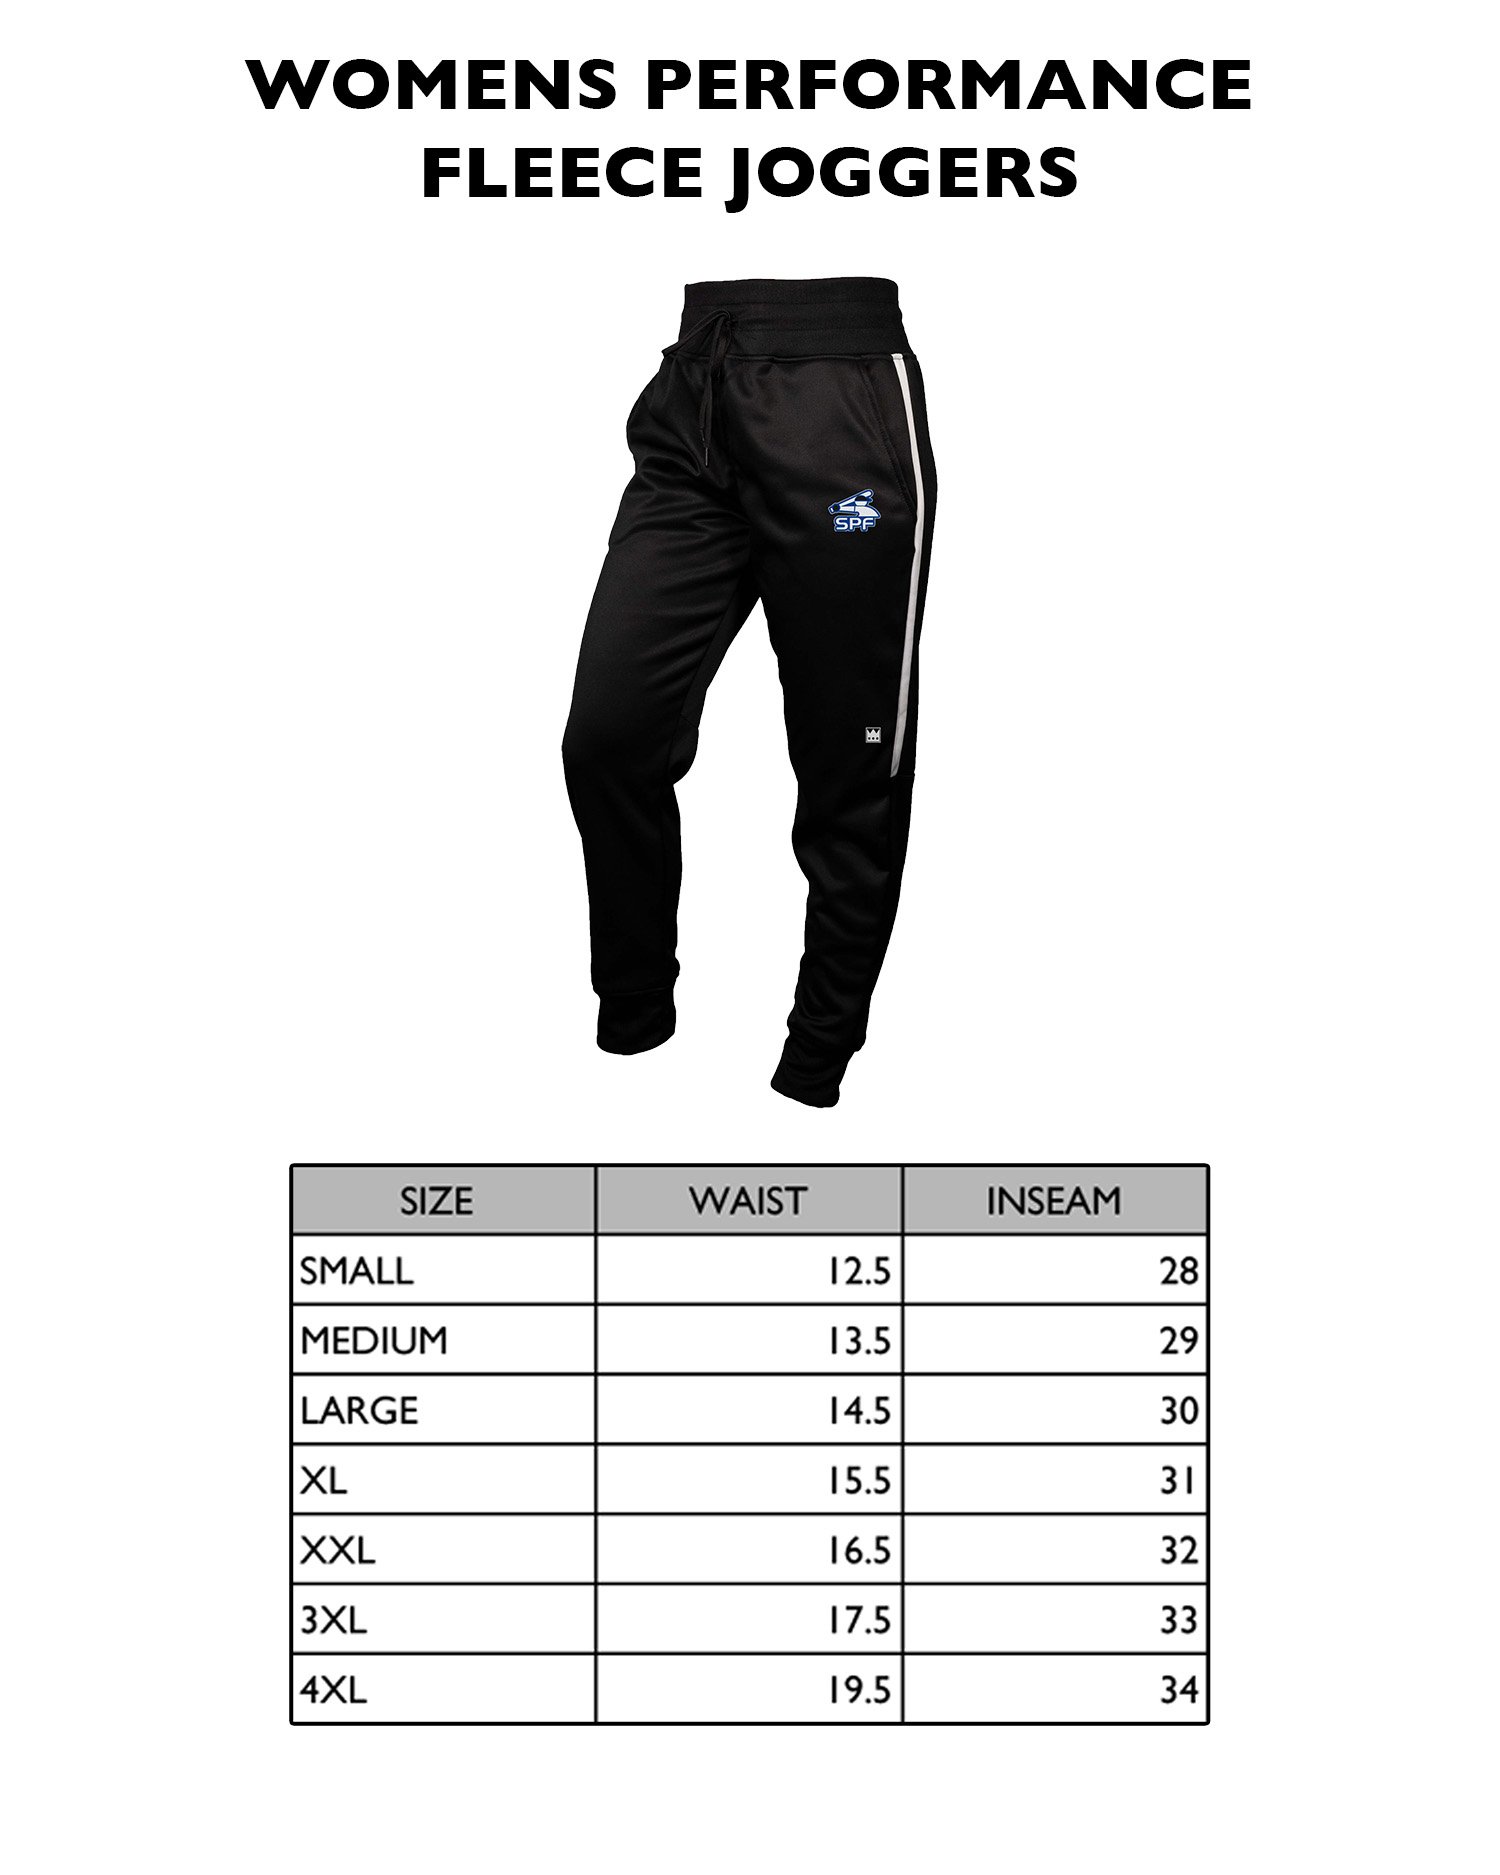 ADIDAS SIZE GUIDE  BOOTCAMP Football Shop